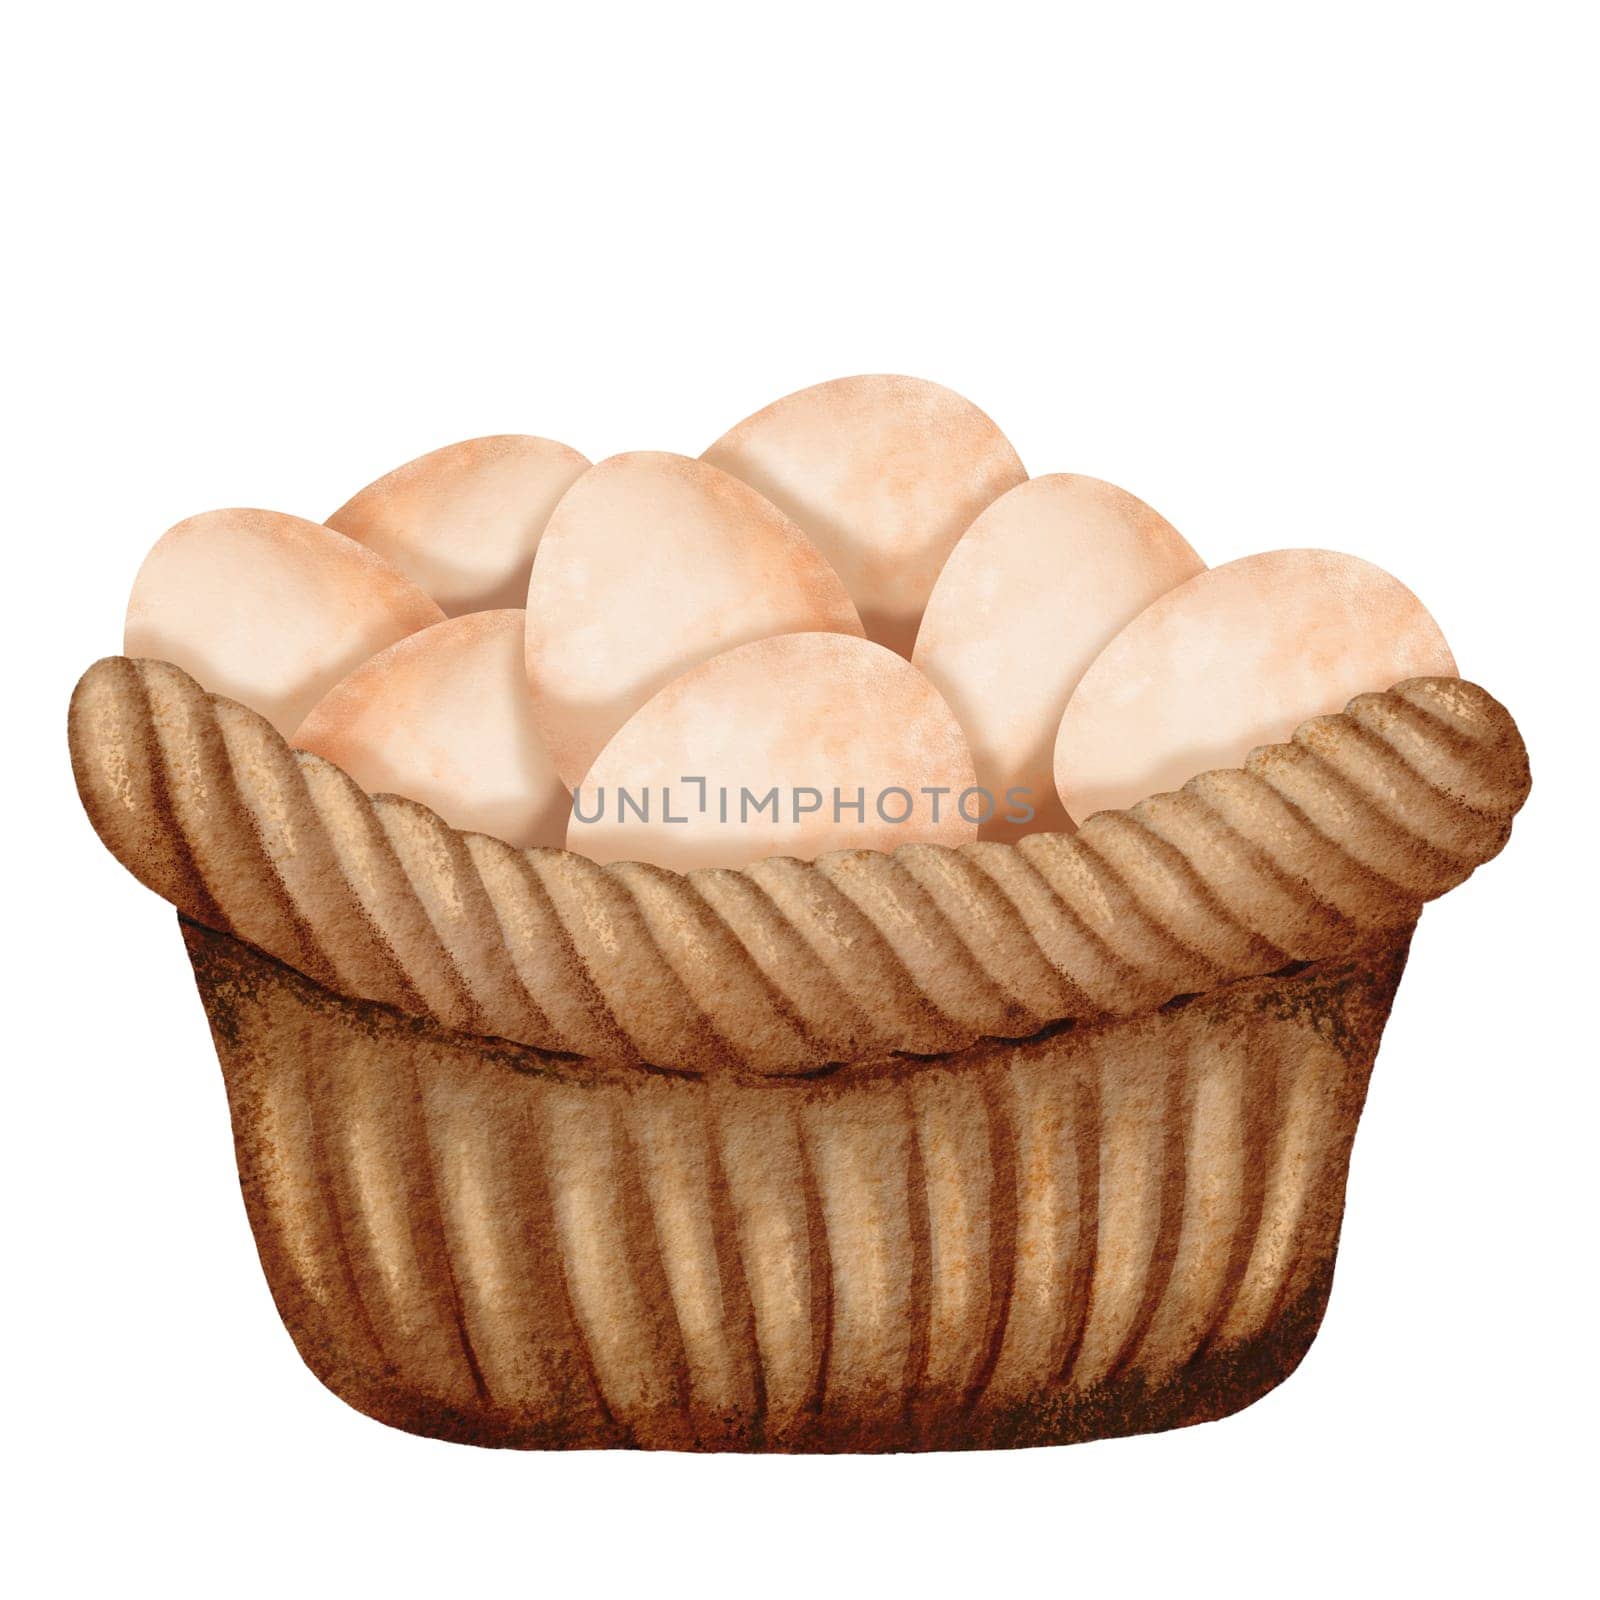 Watercolor illustration of a brown woven basket filled with fresh eggs. Captures the rustic charm of a simple, country-inspired scene. Perfect for conveying a wholesome, farm-fresh atmosphere.